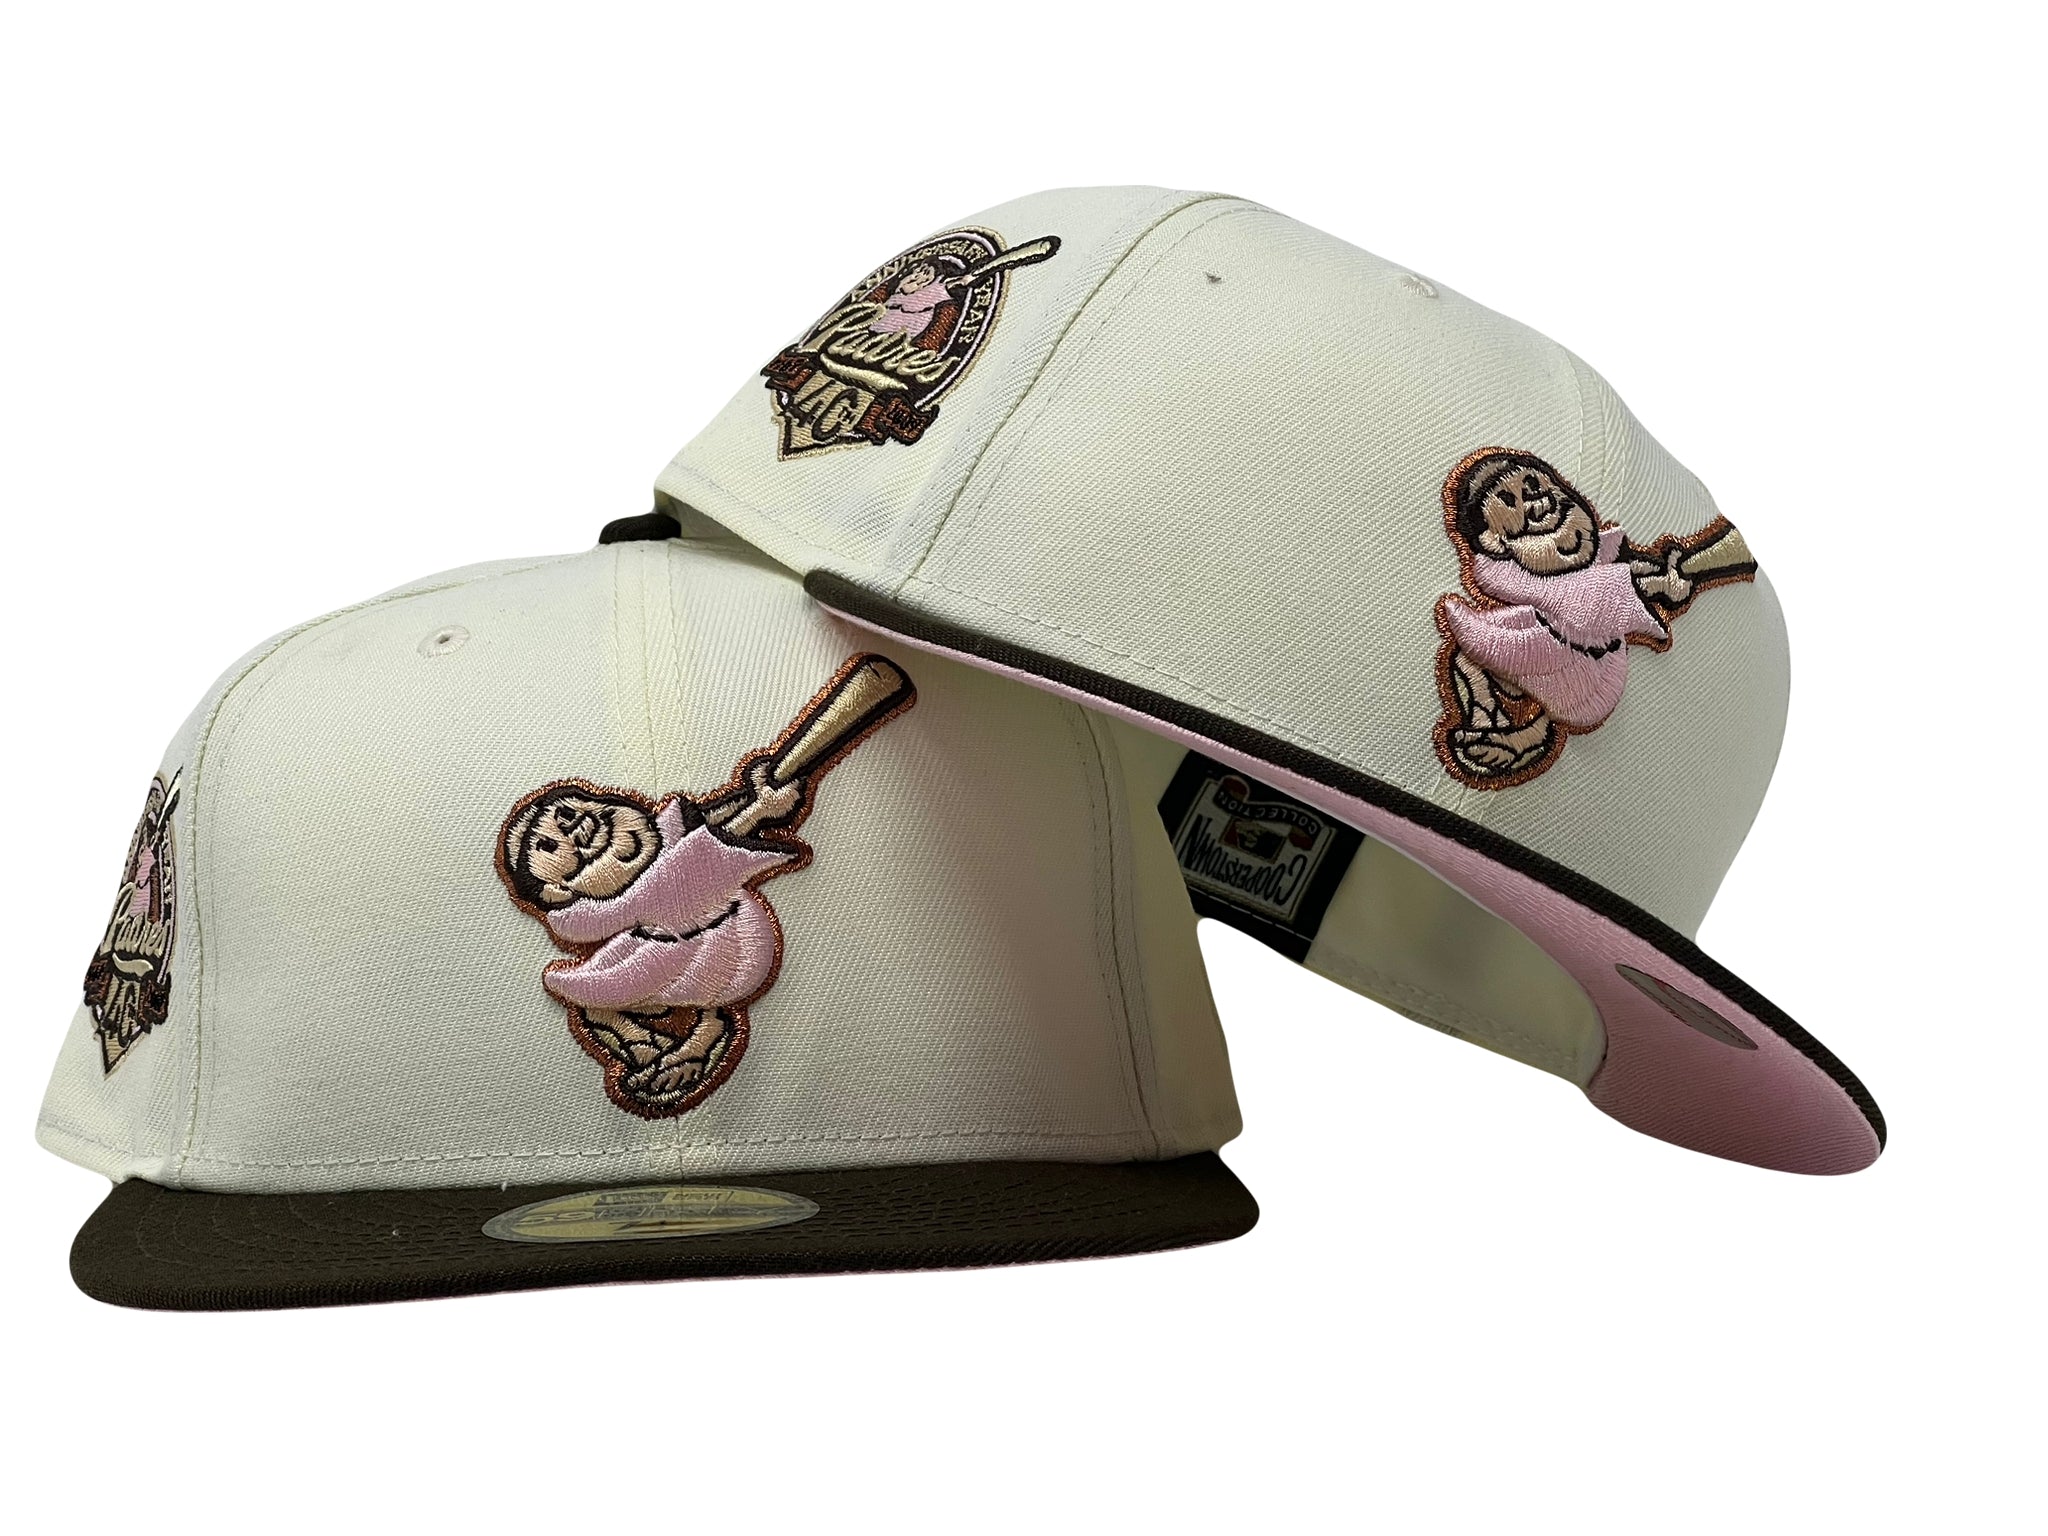 Men's New Era White/Pink San Diego Padres 40th Team Anniversary 59FIFTY Fitted Hat